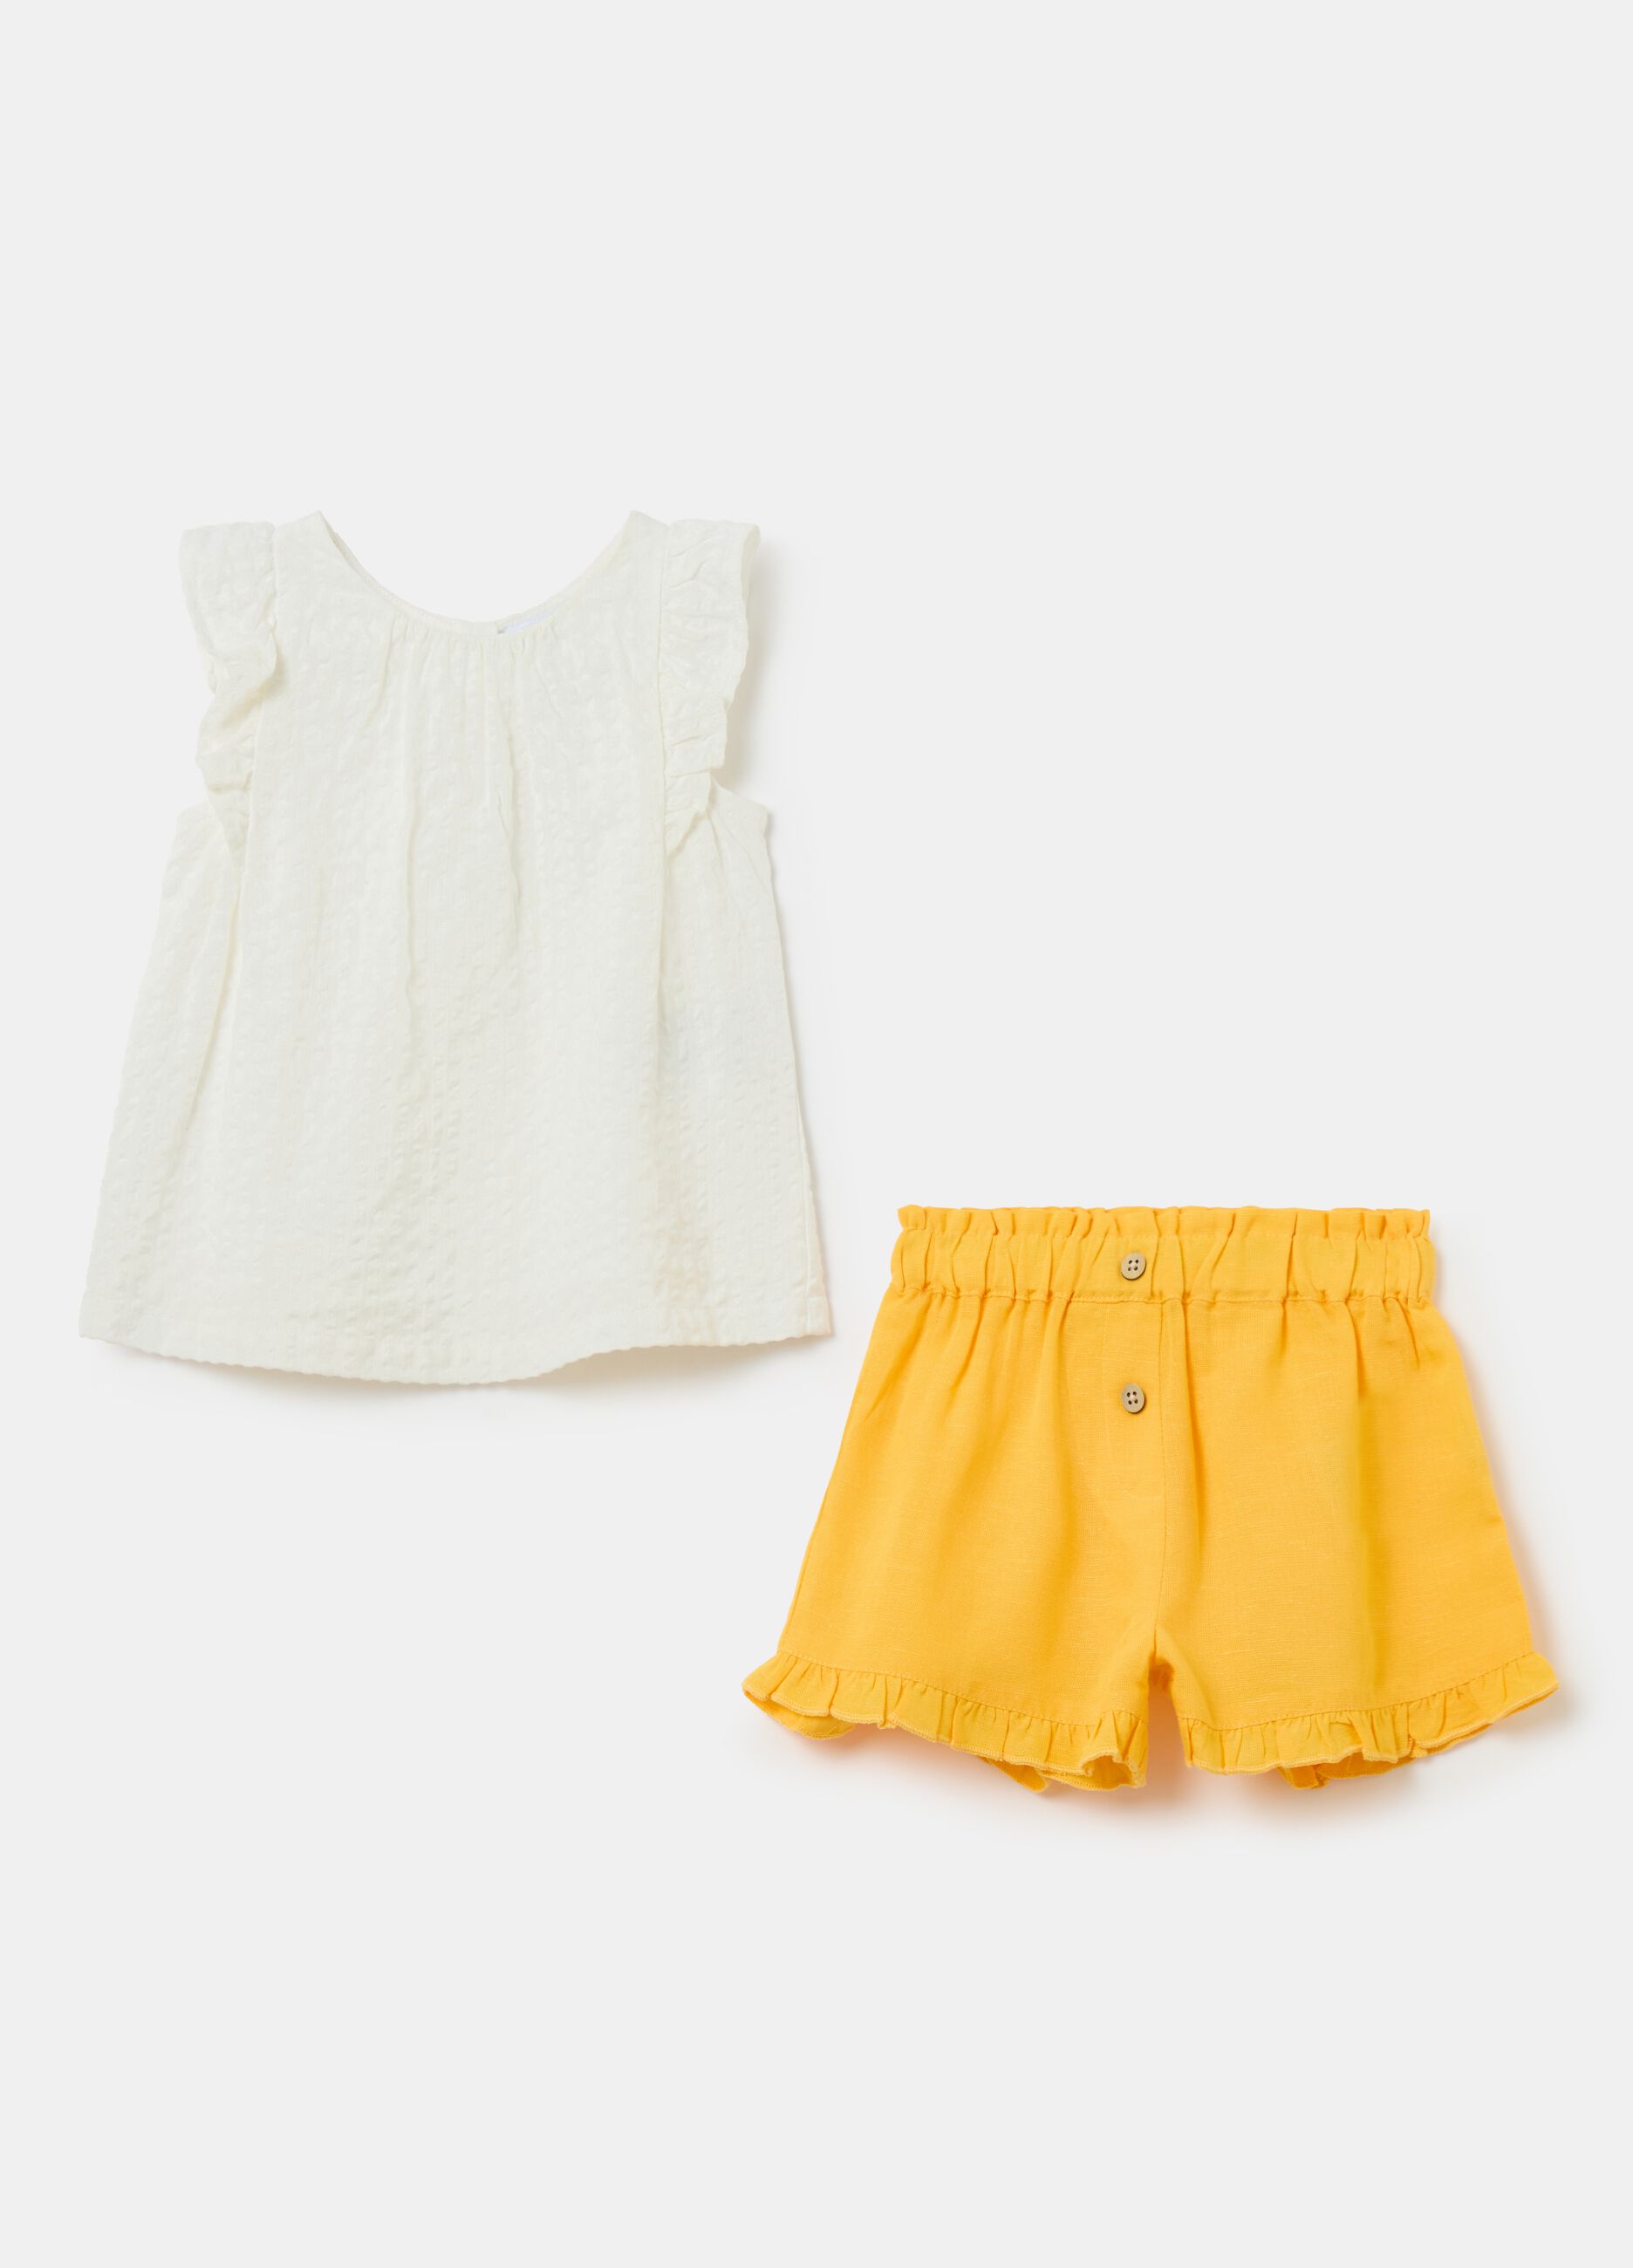 Tank top and shorts set with frills